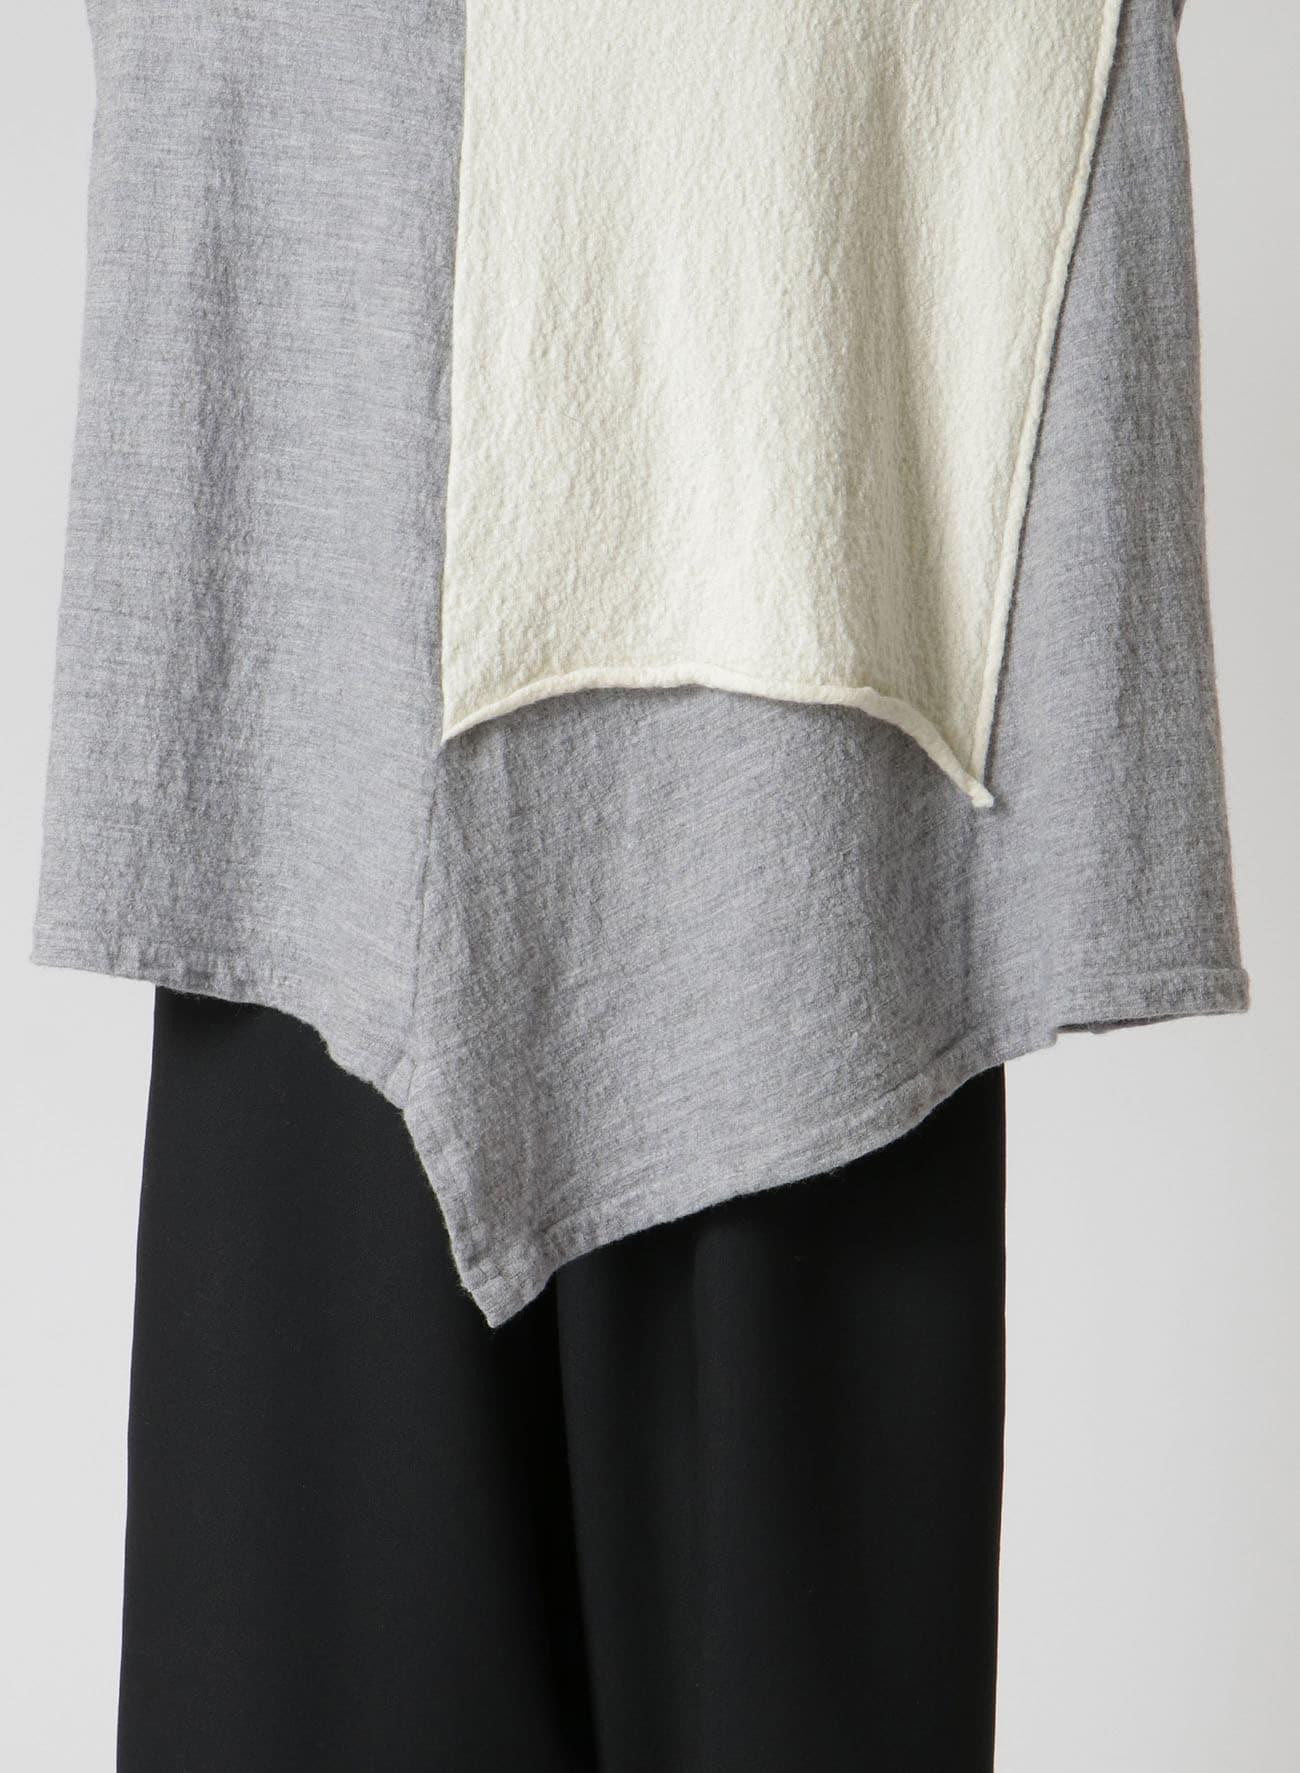 PLAIN STITCH COLOUR PRODUCT SHRINKAGE ROUND NECK FLARE PATCHED T